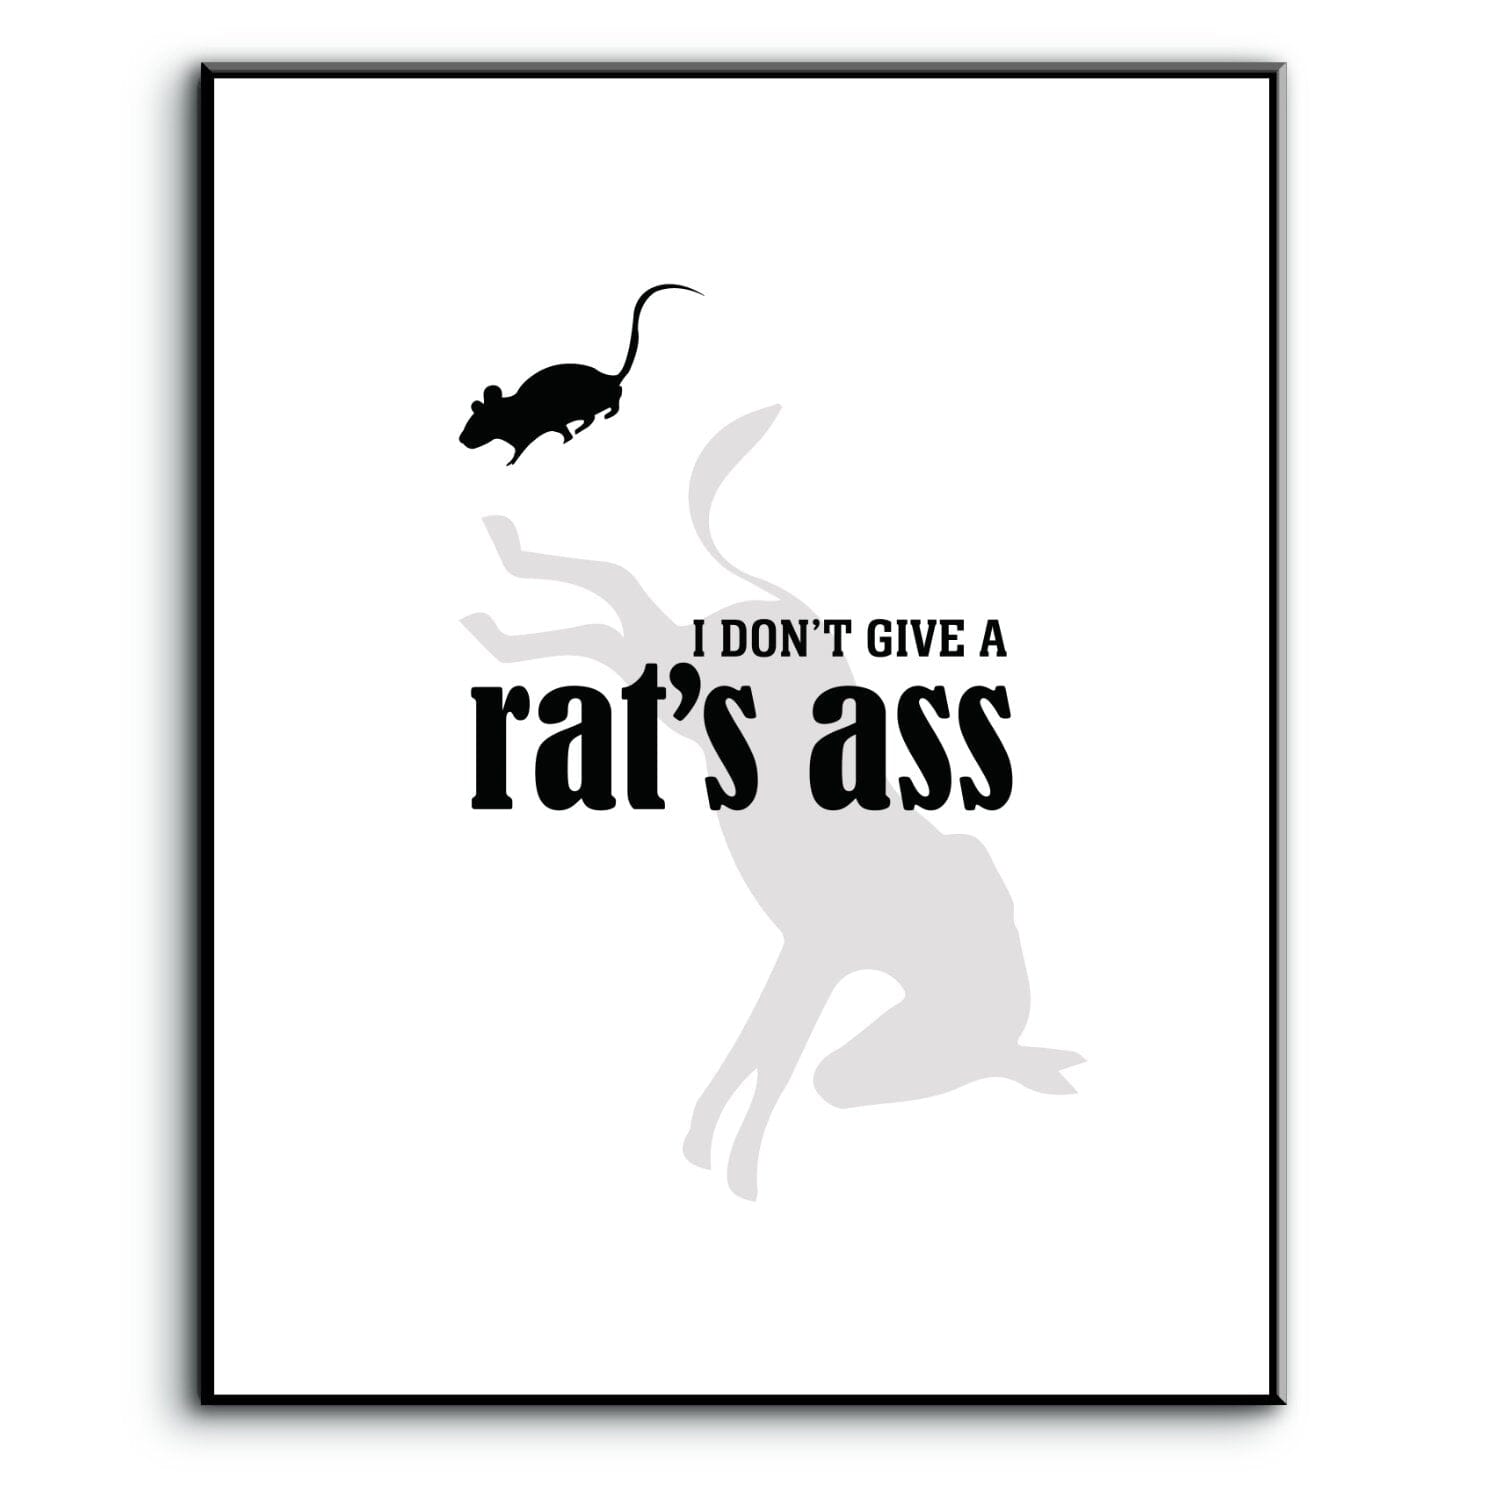 I Don't Give a Rat's Ass - Wise and Witty Sarcastic Print Wise and Wiseass Quotes Song Lyrics Art 8x10 Plaque Mount 